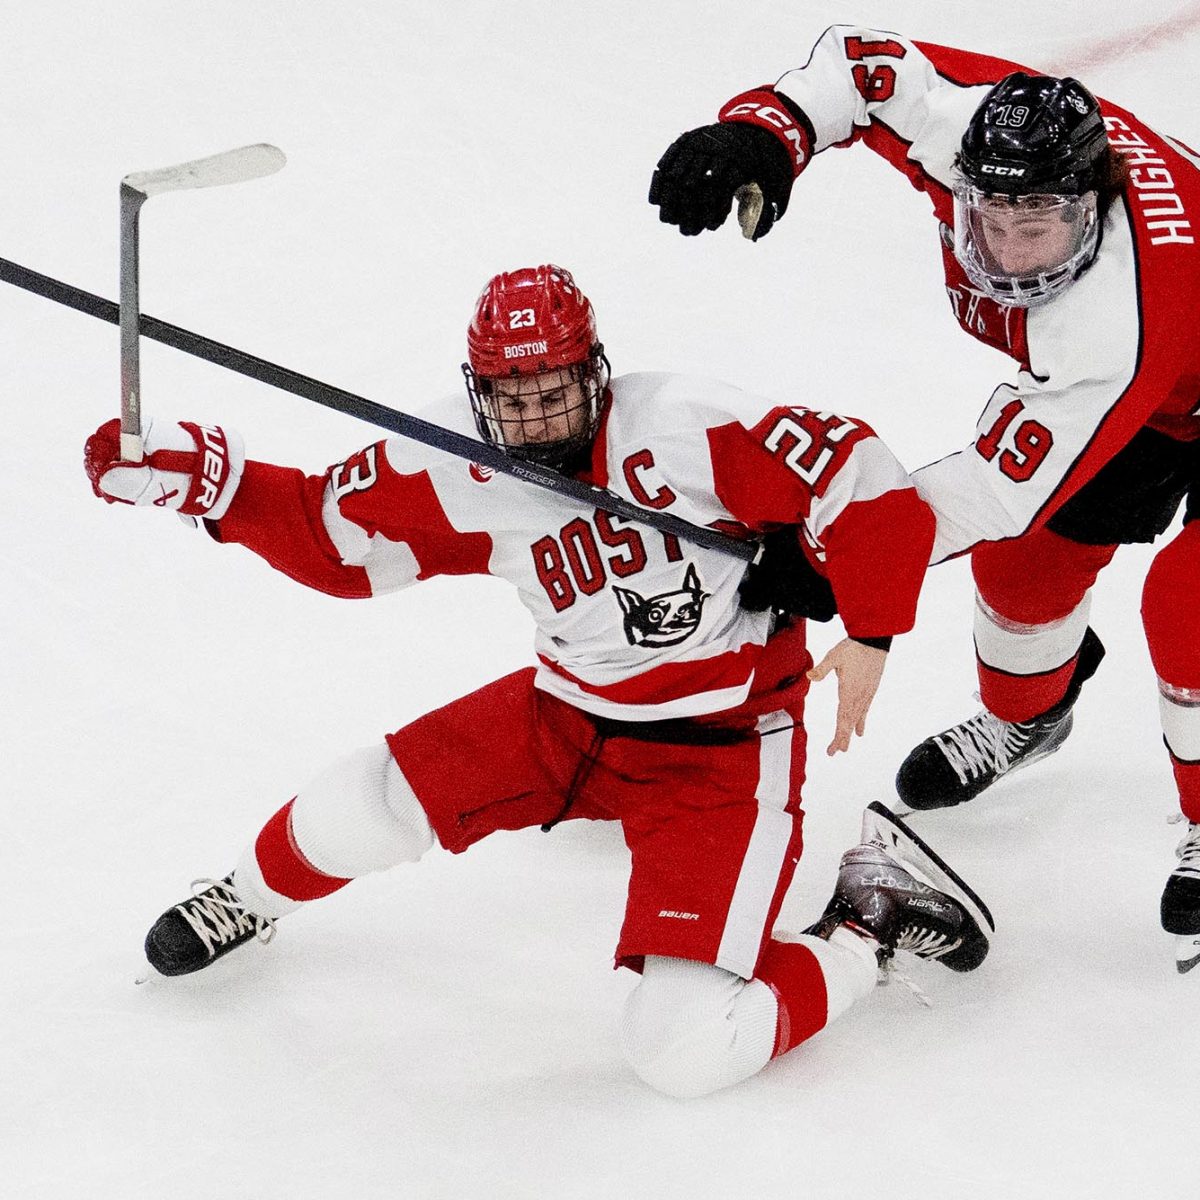 Notes: Beanpot takes 70th lap around rink - College Hockey, Inc.